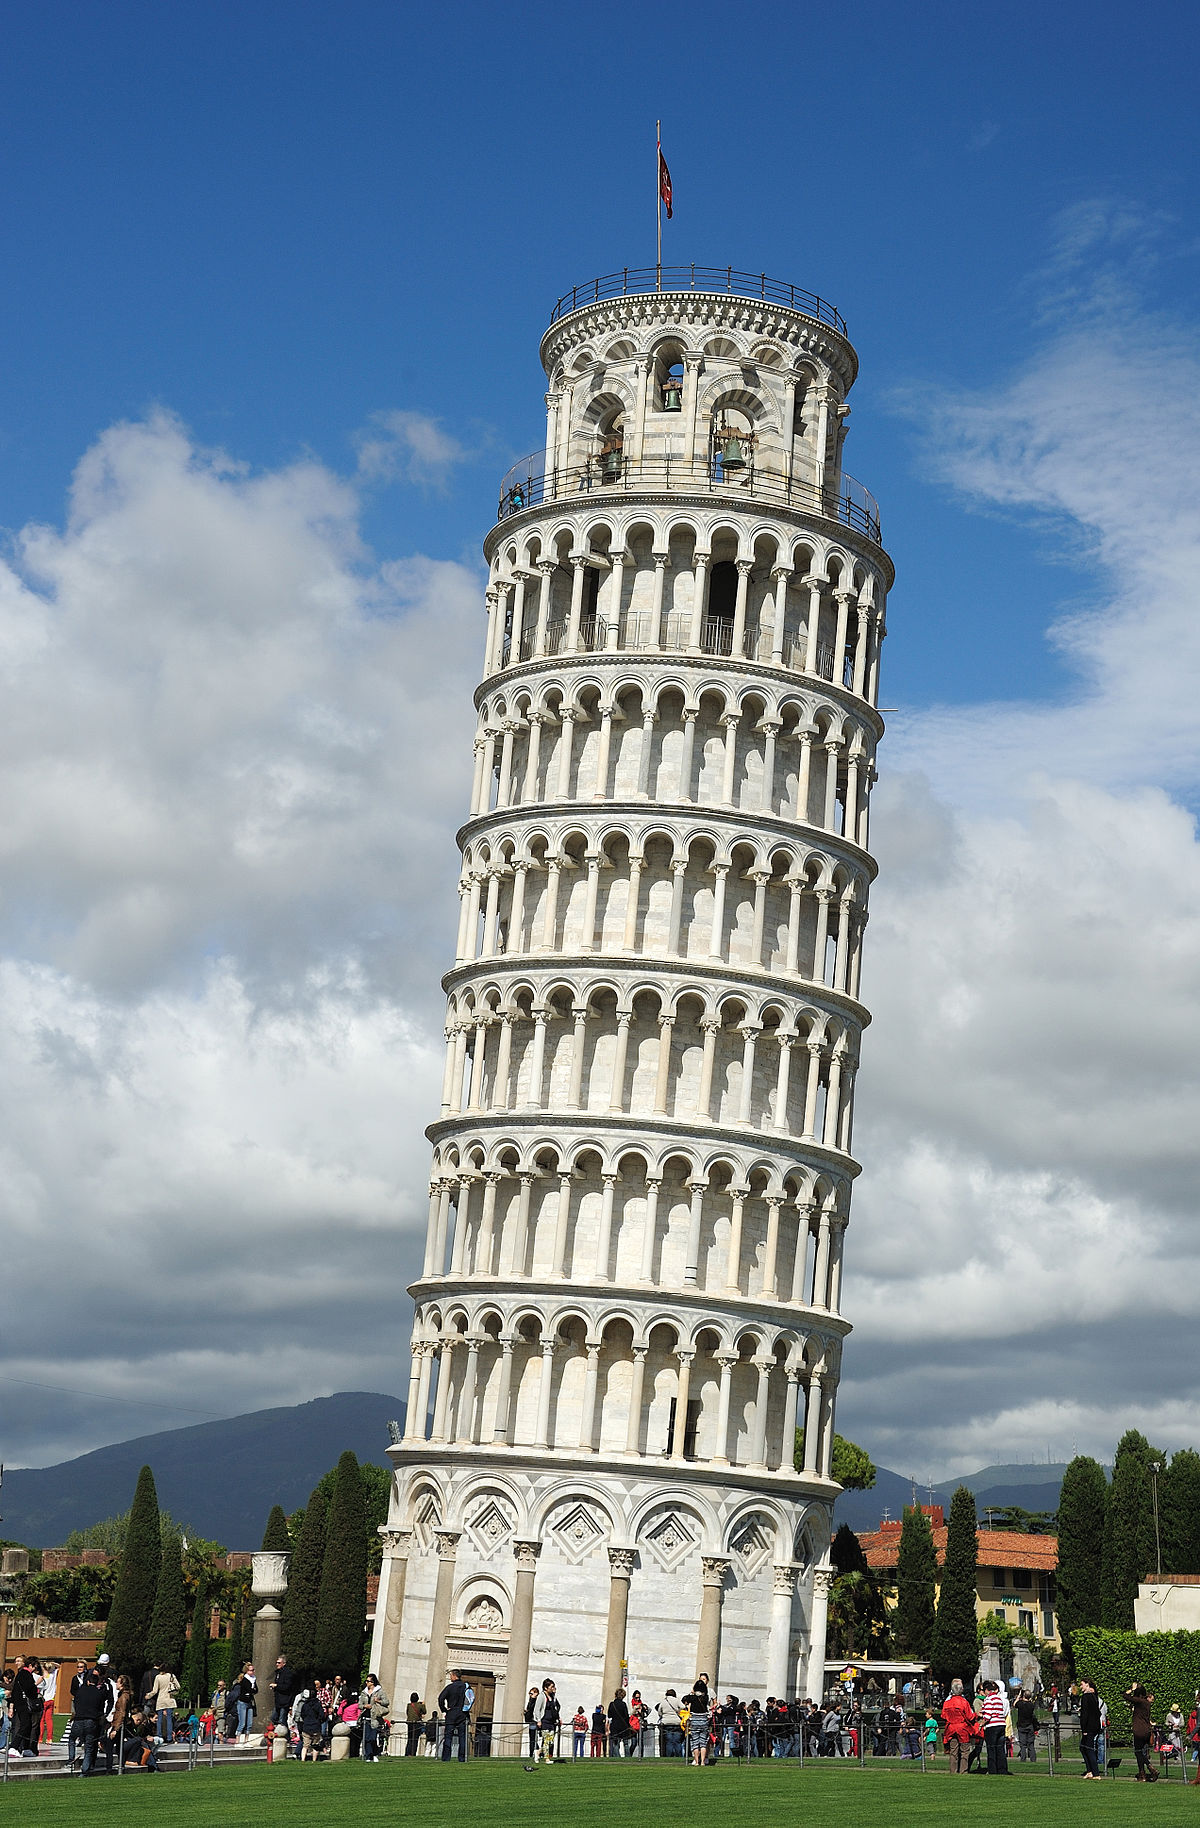 1200px-The-Leaning-Tower-of-Pisa-SB.jpg